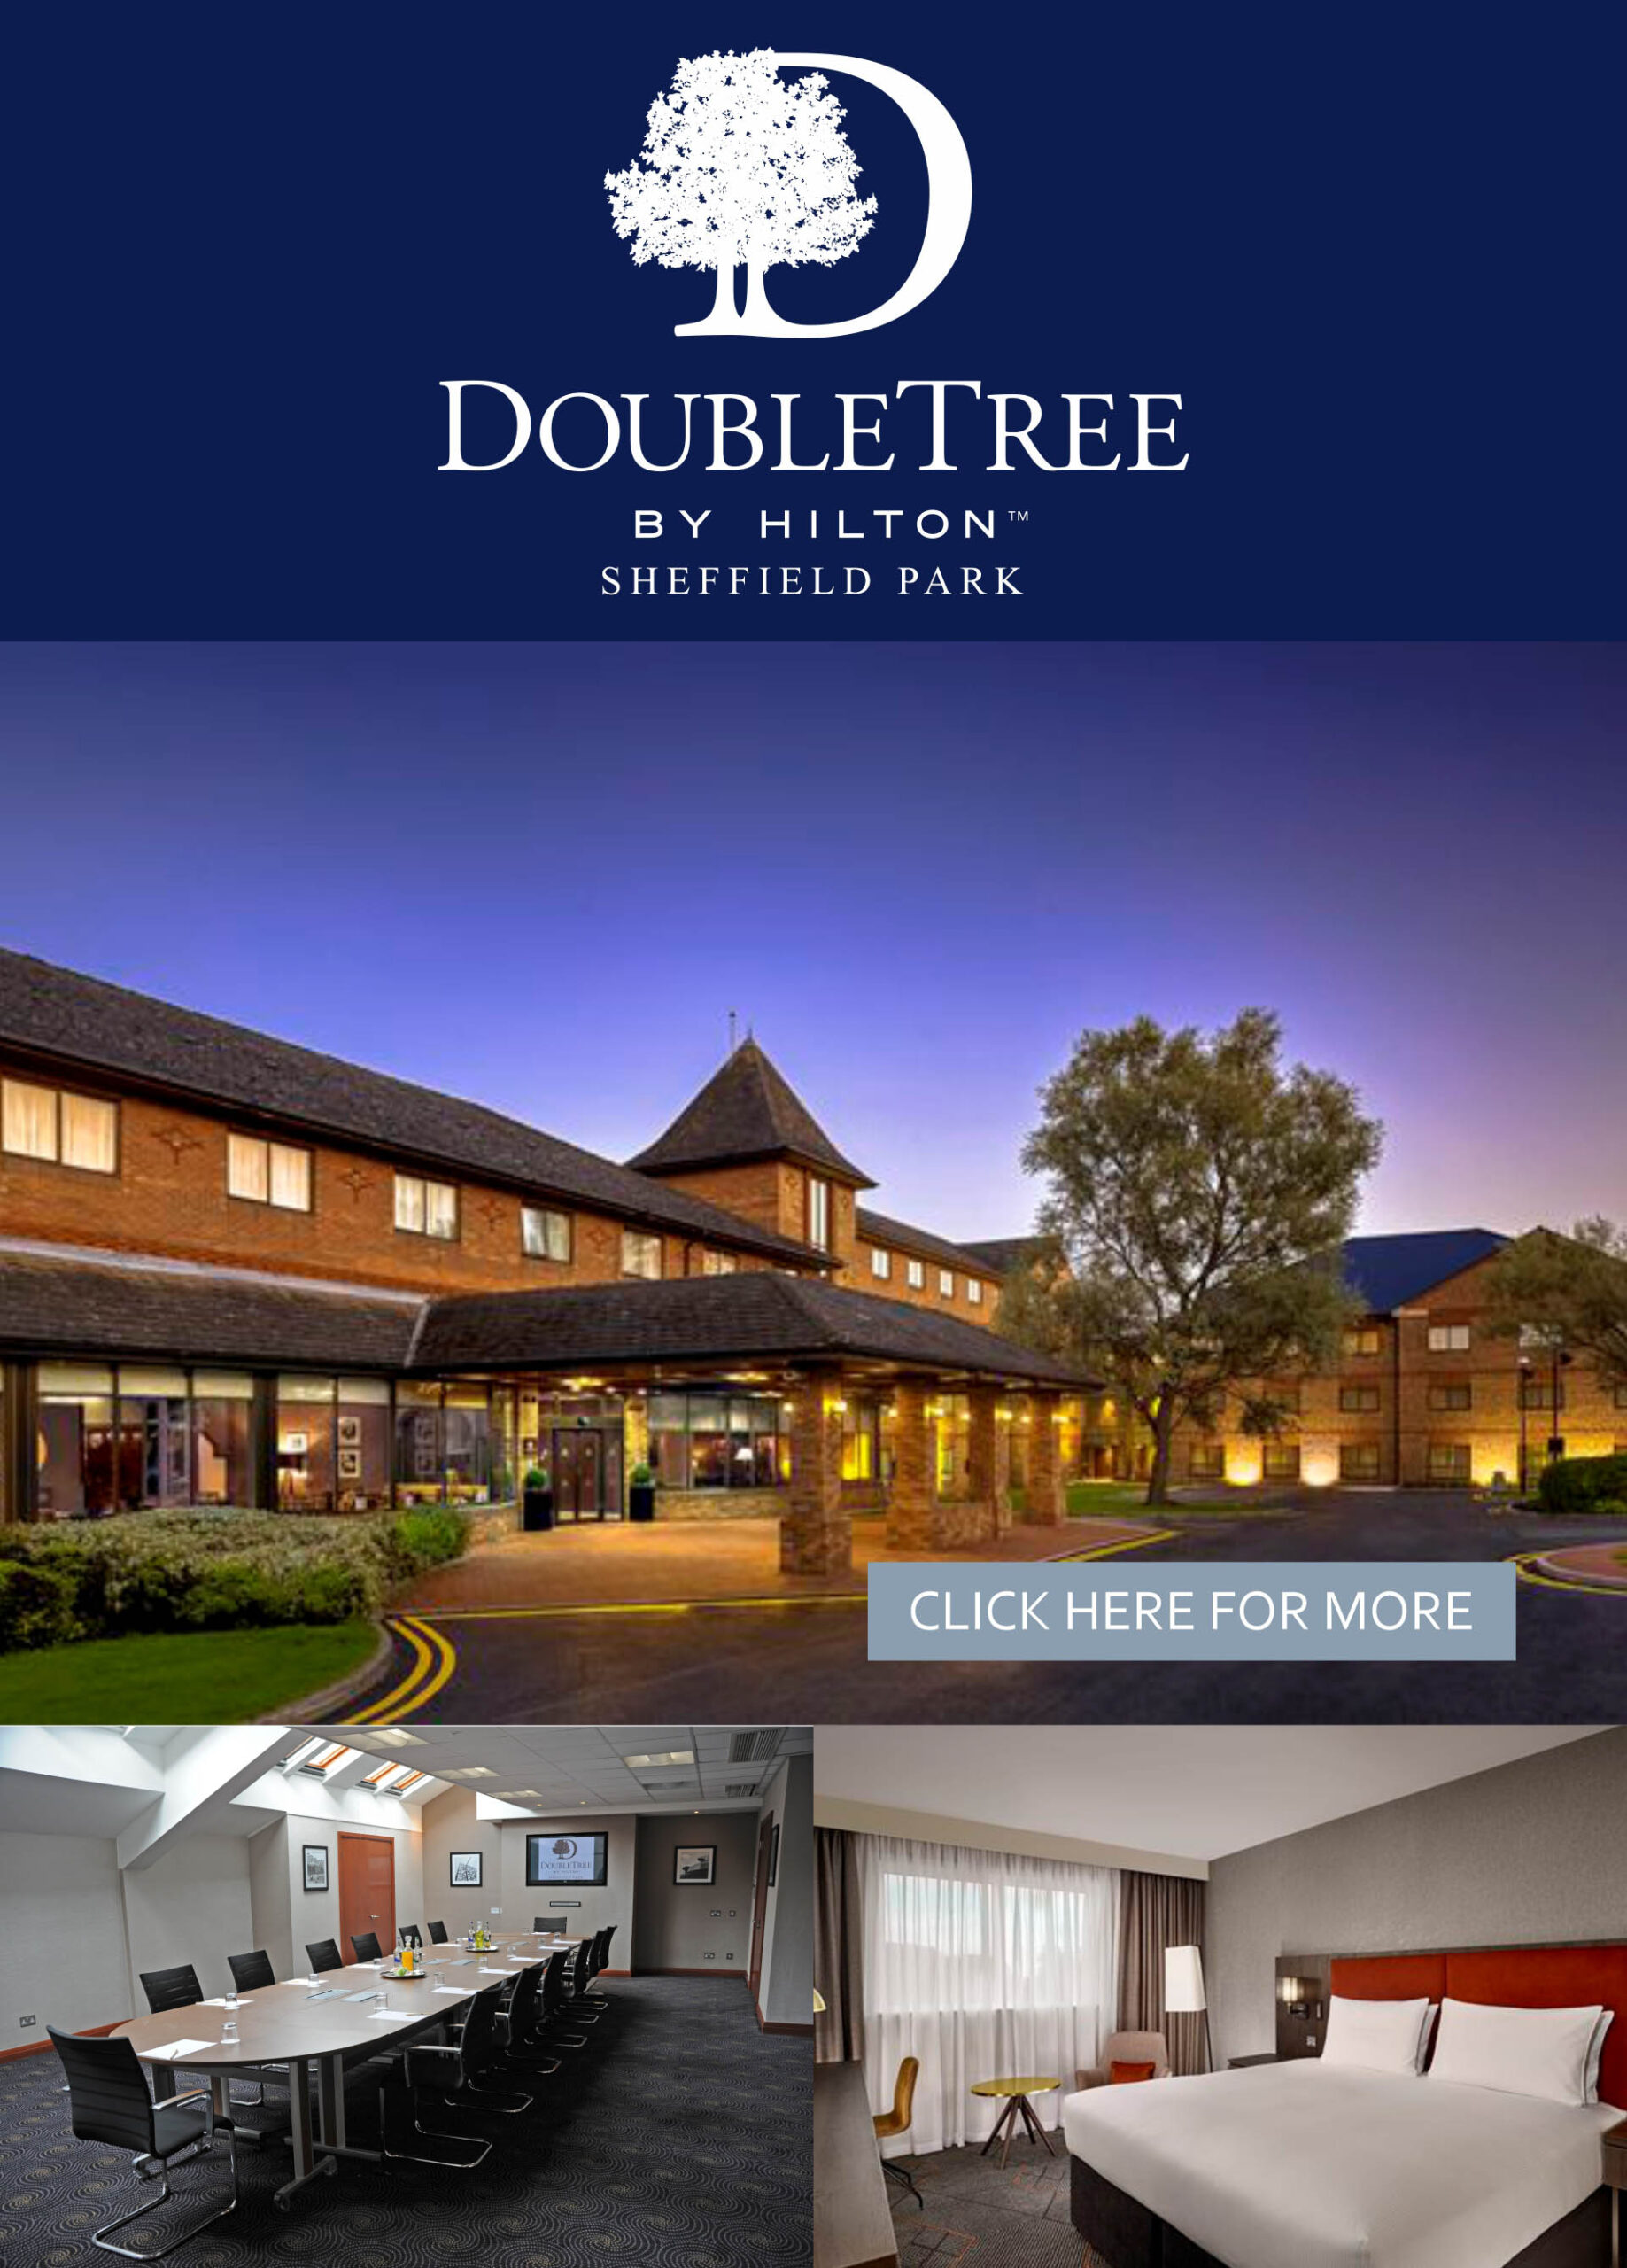 DoubleTree by Hilton Sheffield Park Hotel meeting image